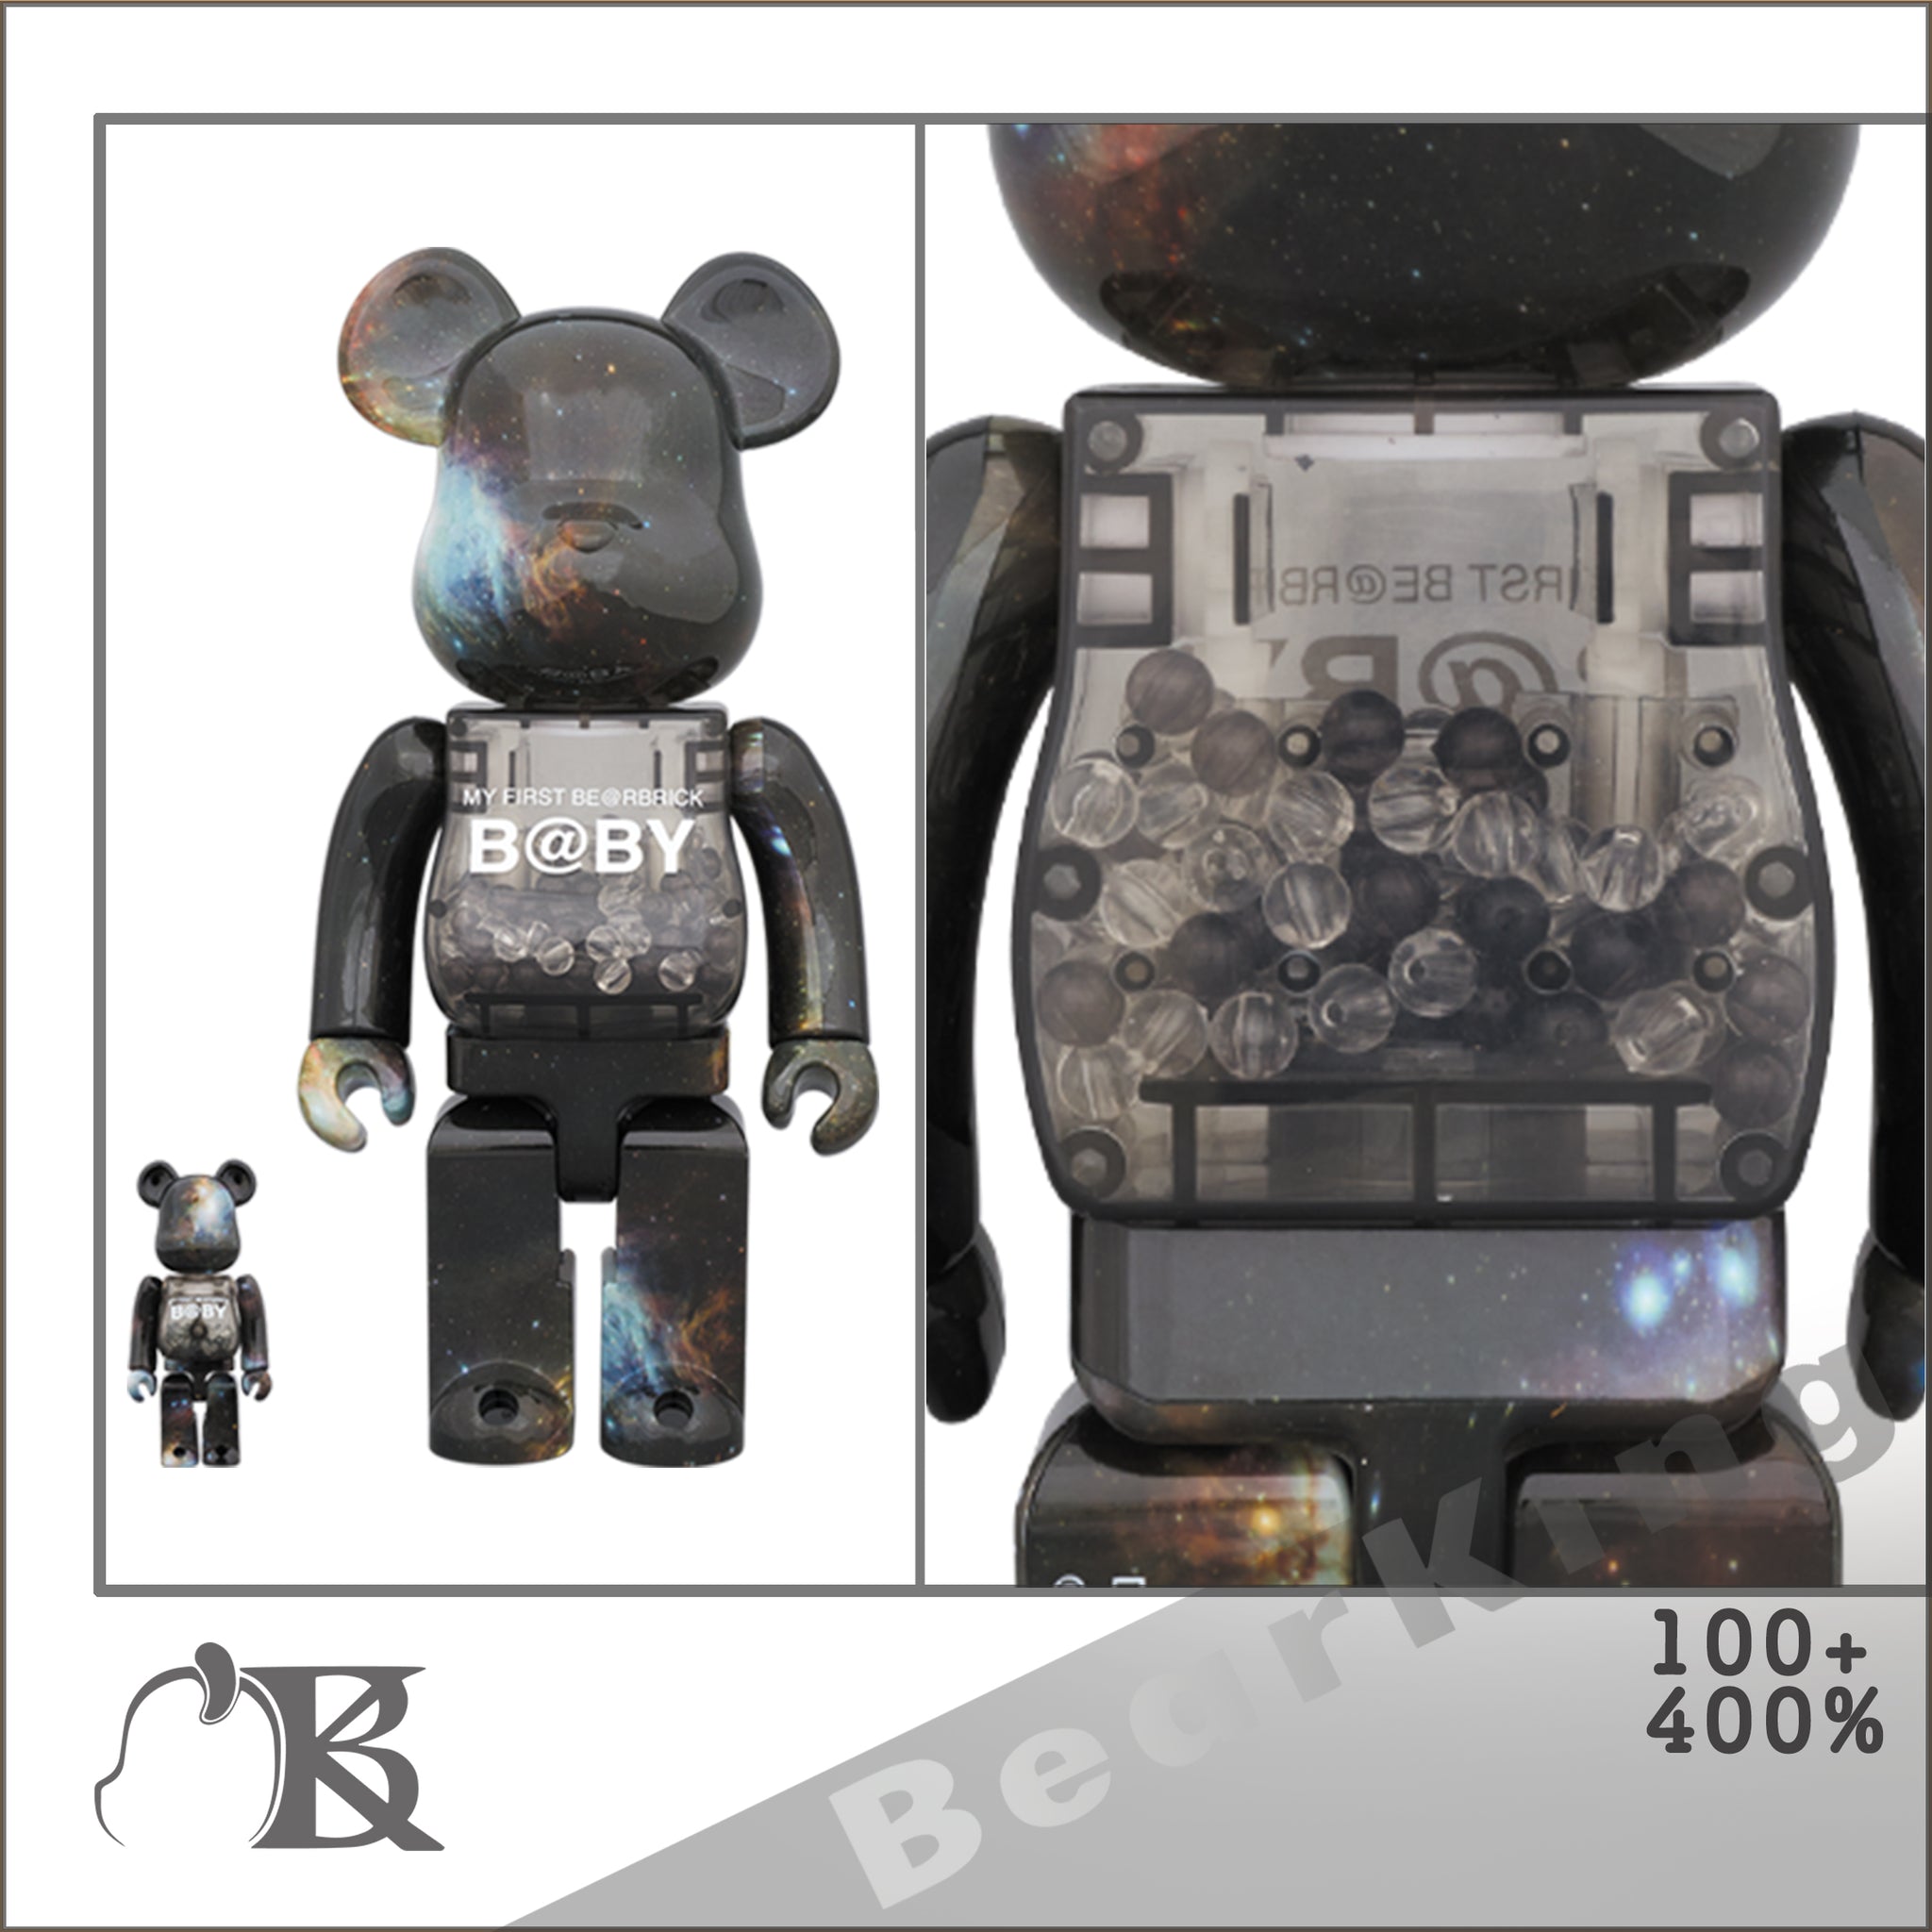 MY FIRST BE@RBRICK B@BY SPACE Ver.100％+400% 千秋Baby 星空